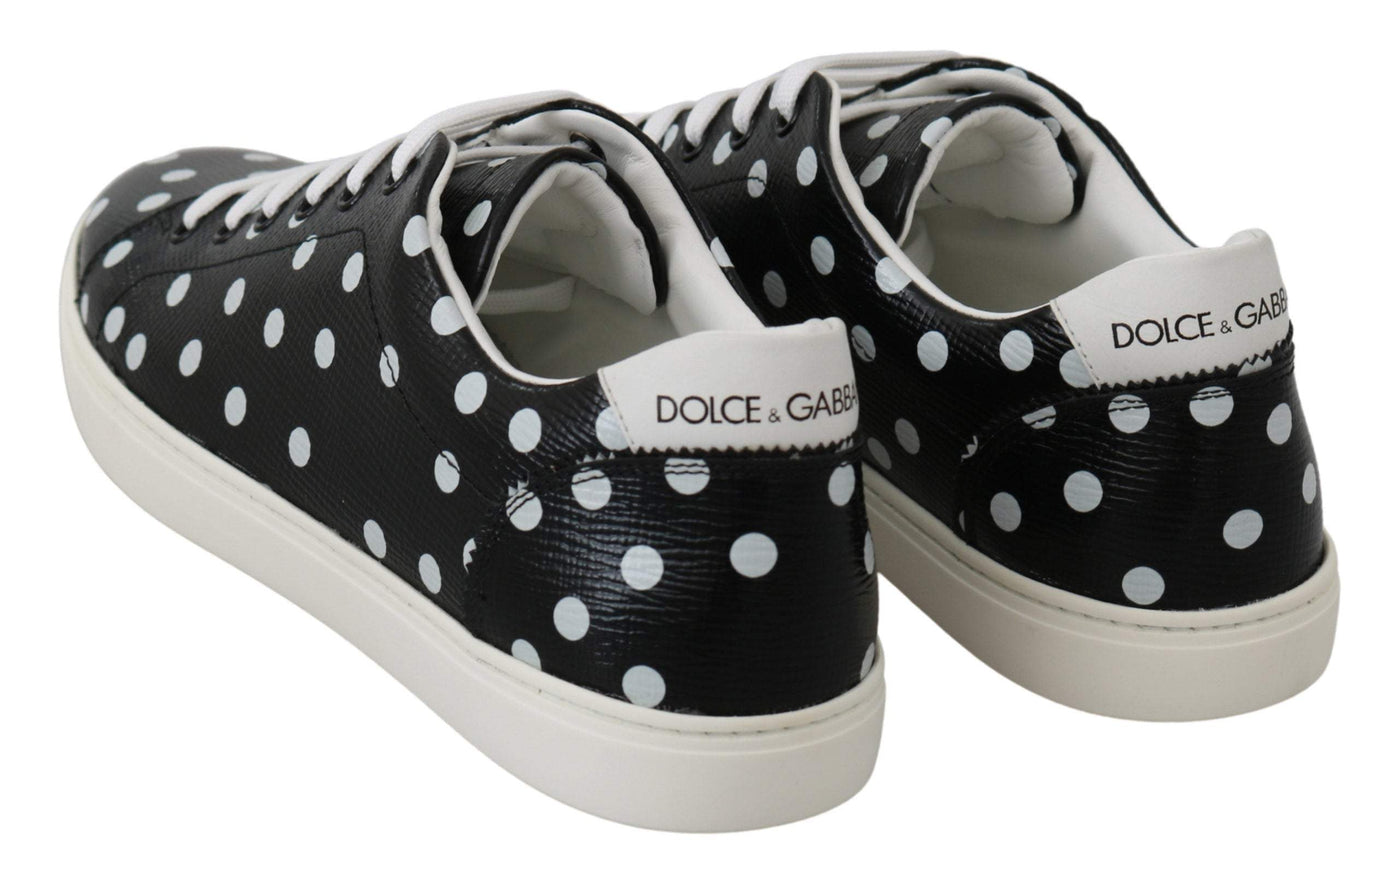 Dolce & Gabbana Black Leather Polka Dots Sneakers Shoes Black, Dolce & Gabbana, EU35.5/US5, EU36/US5.5, EU37/US6.5, EU38.5/US8, EU41/US10.5, feed-agegroup-adult, feed-color-Black, feed-gender-female, Shoes - New Arrivals, Sneakers - Women - Shoes at SEYMAYKA